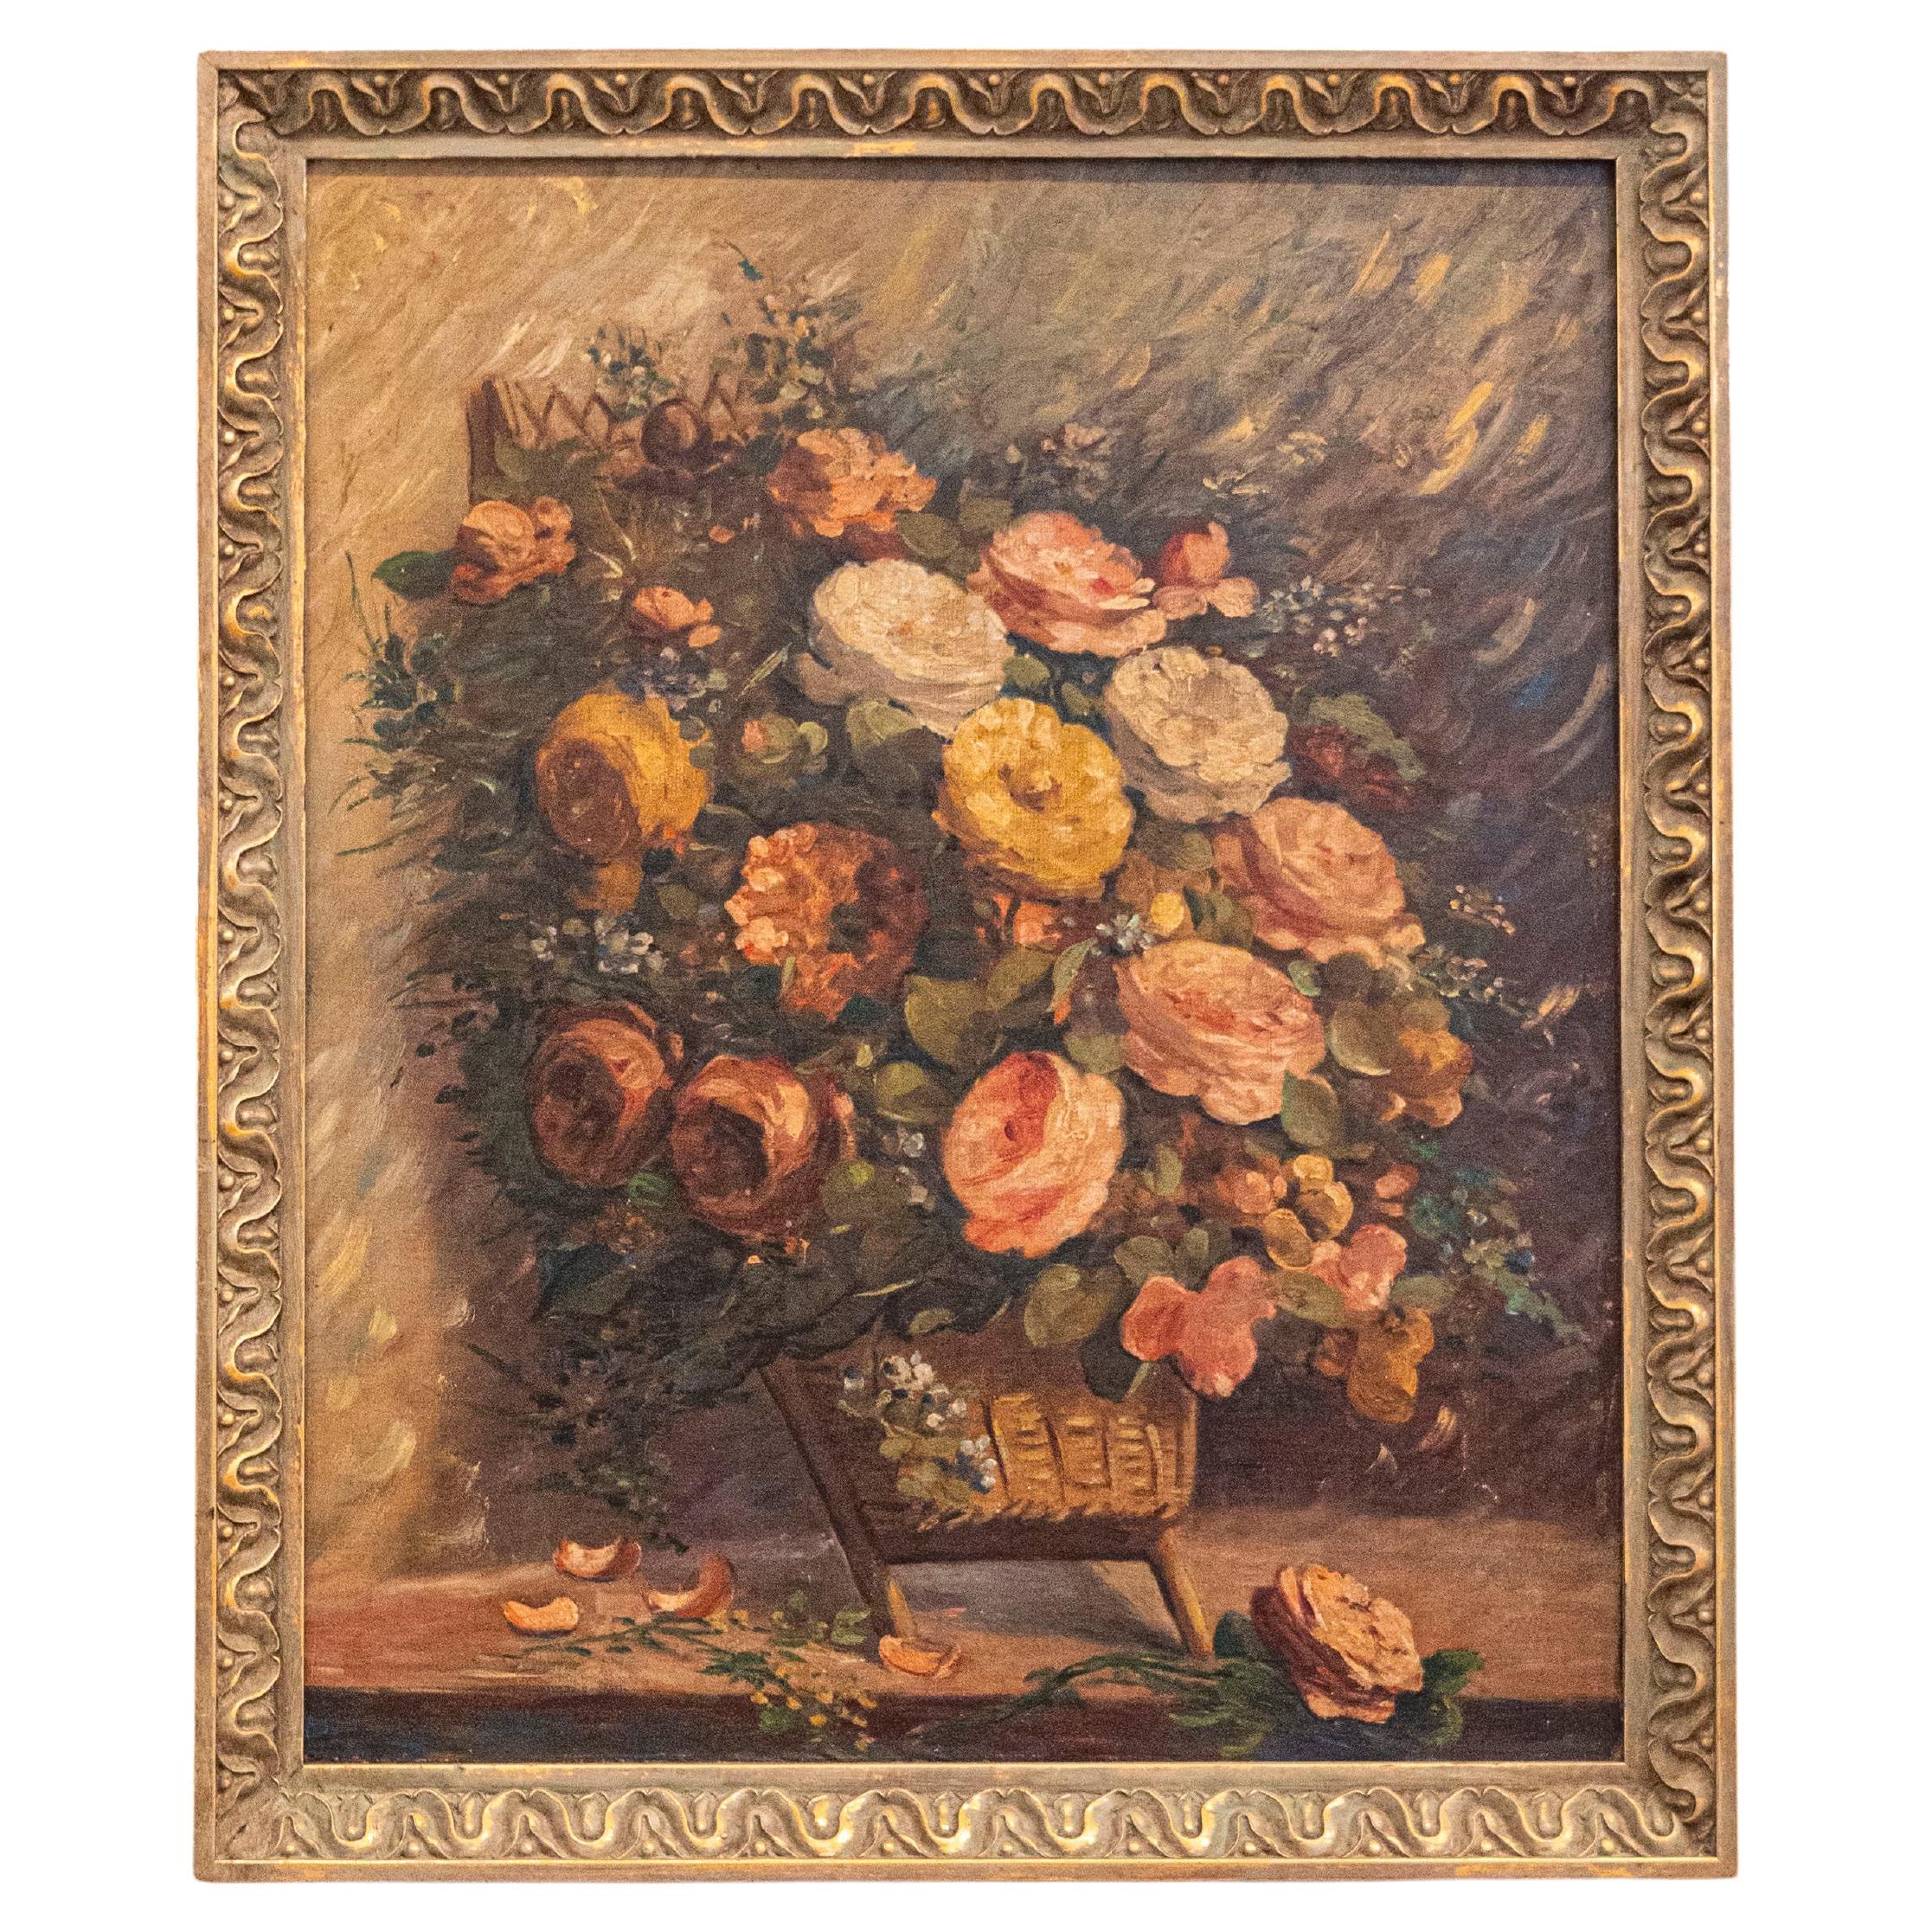 French 19th Century Oil on Canvas Still-Life Painting Depicting Roses in Basket